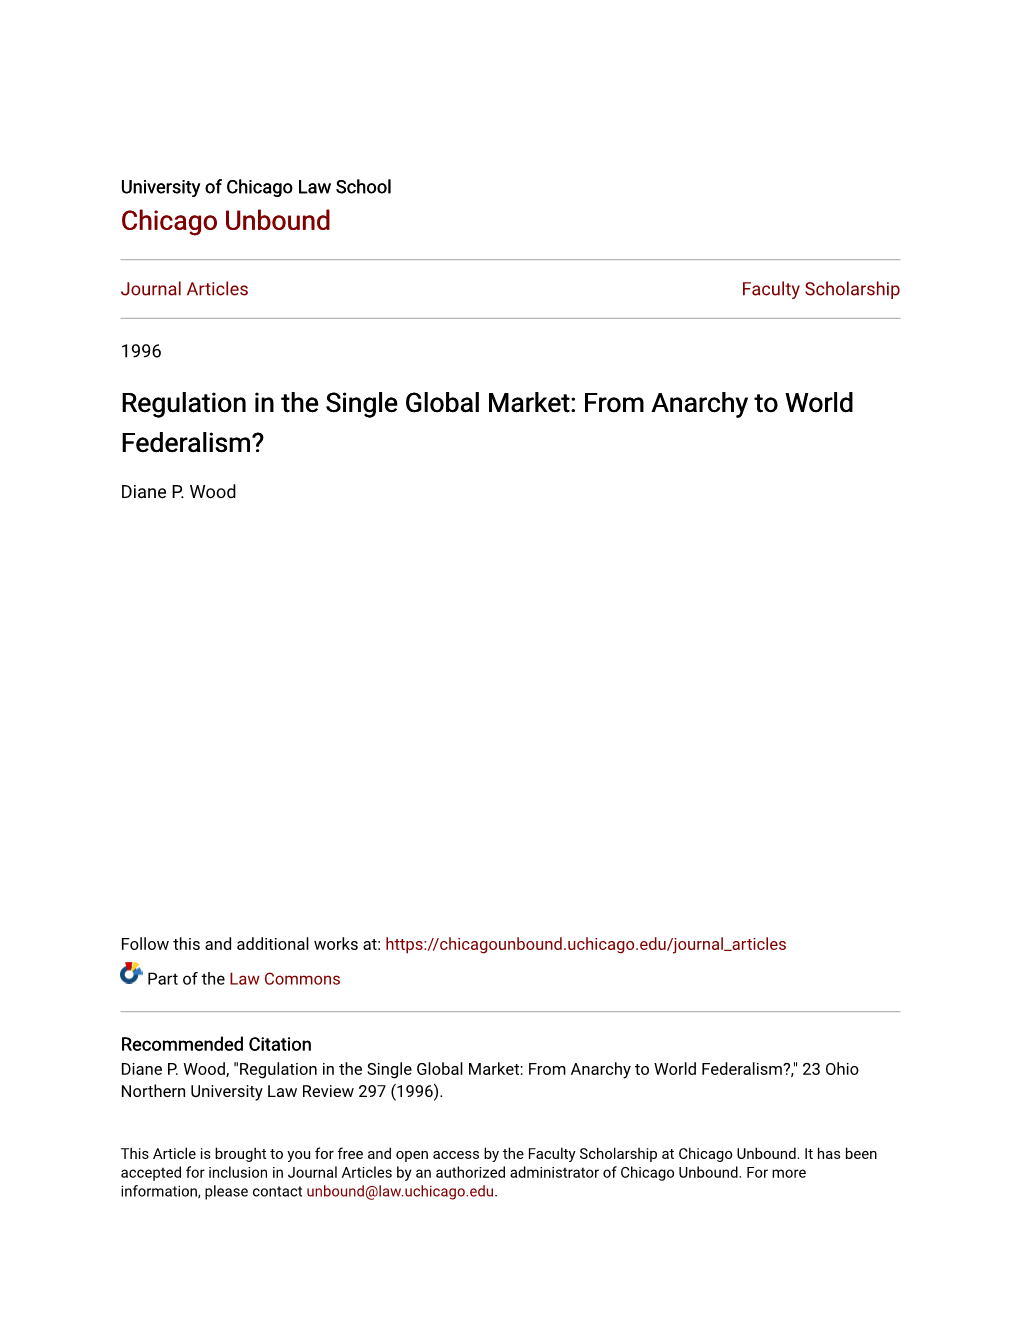 Regulation in the Single Global Market: from Anarchy to World Federalism?